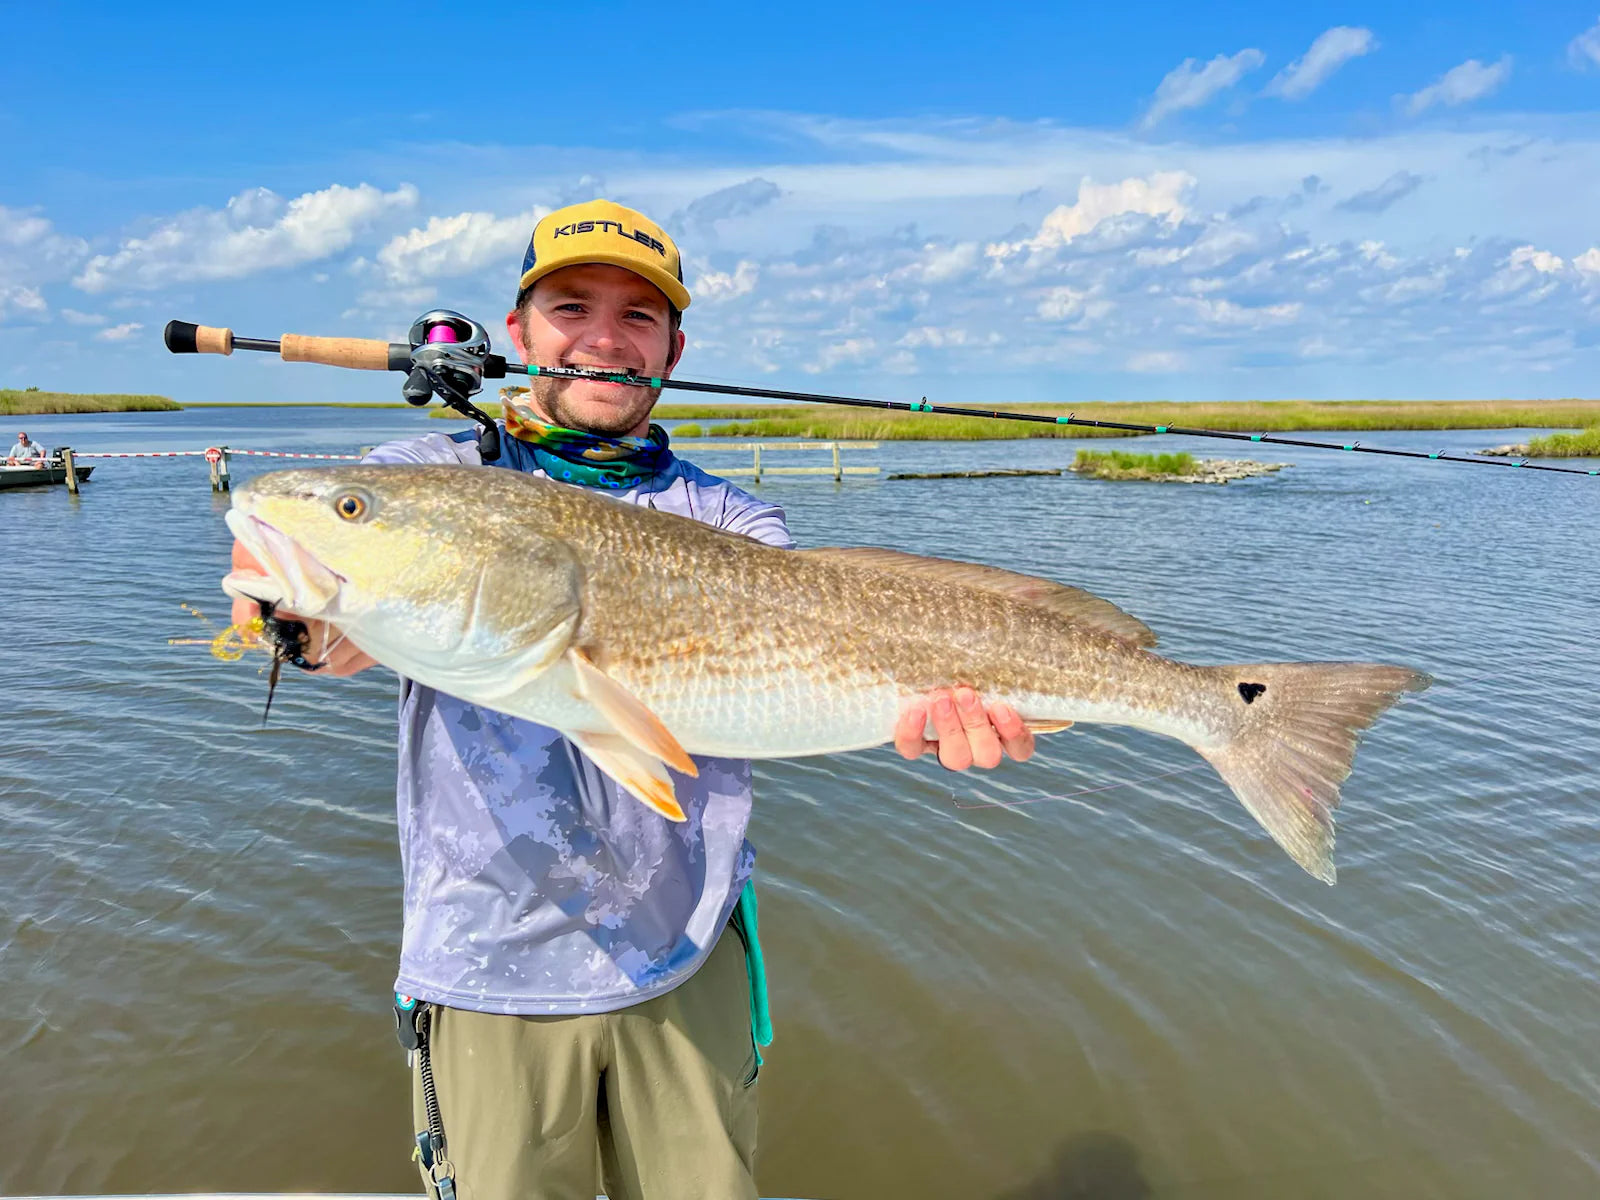 The Kistler Texas Mag Wader Saltwater Rod: The Ultimate Inshore Fishing Experience